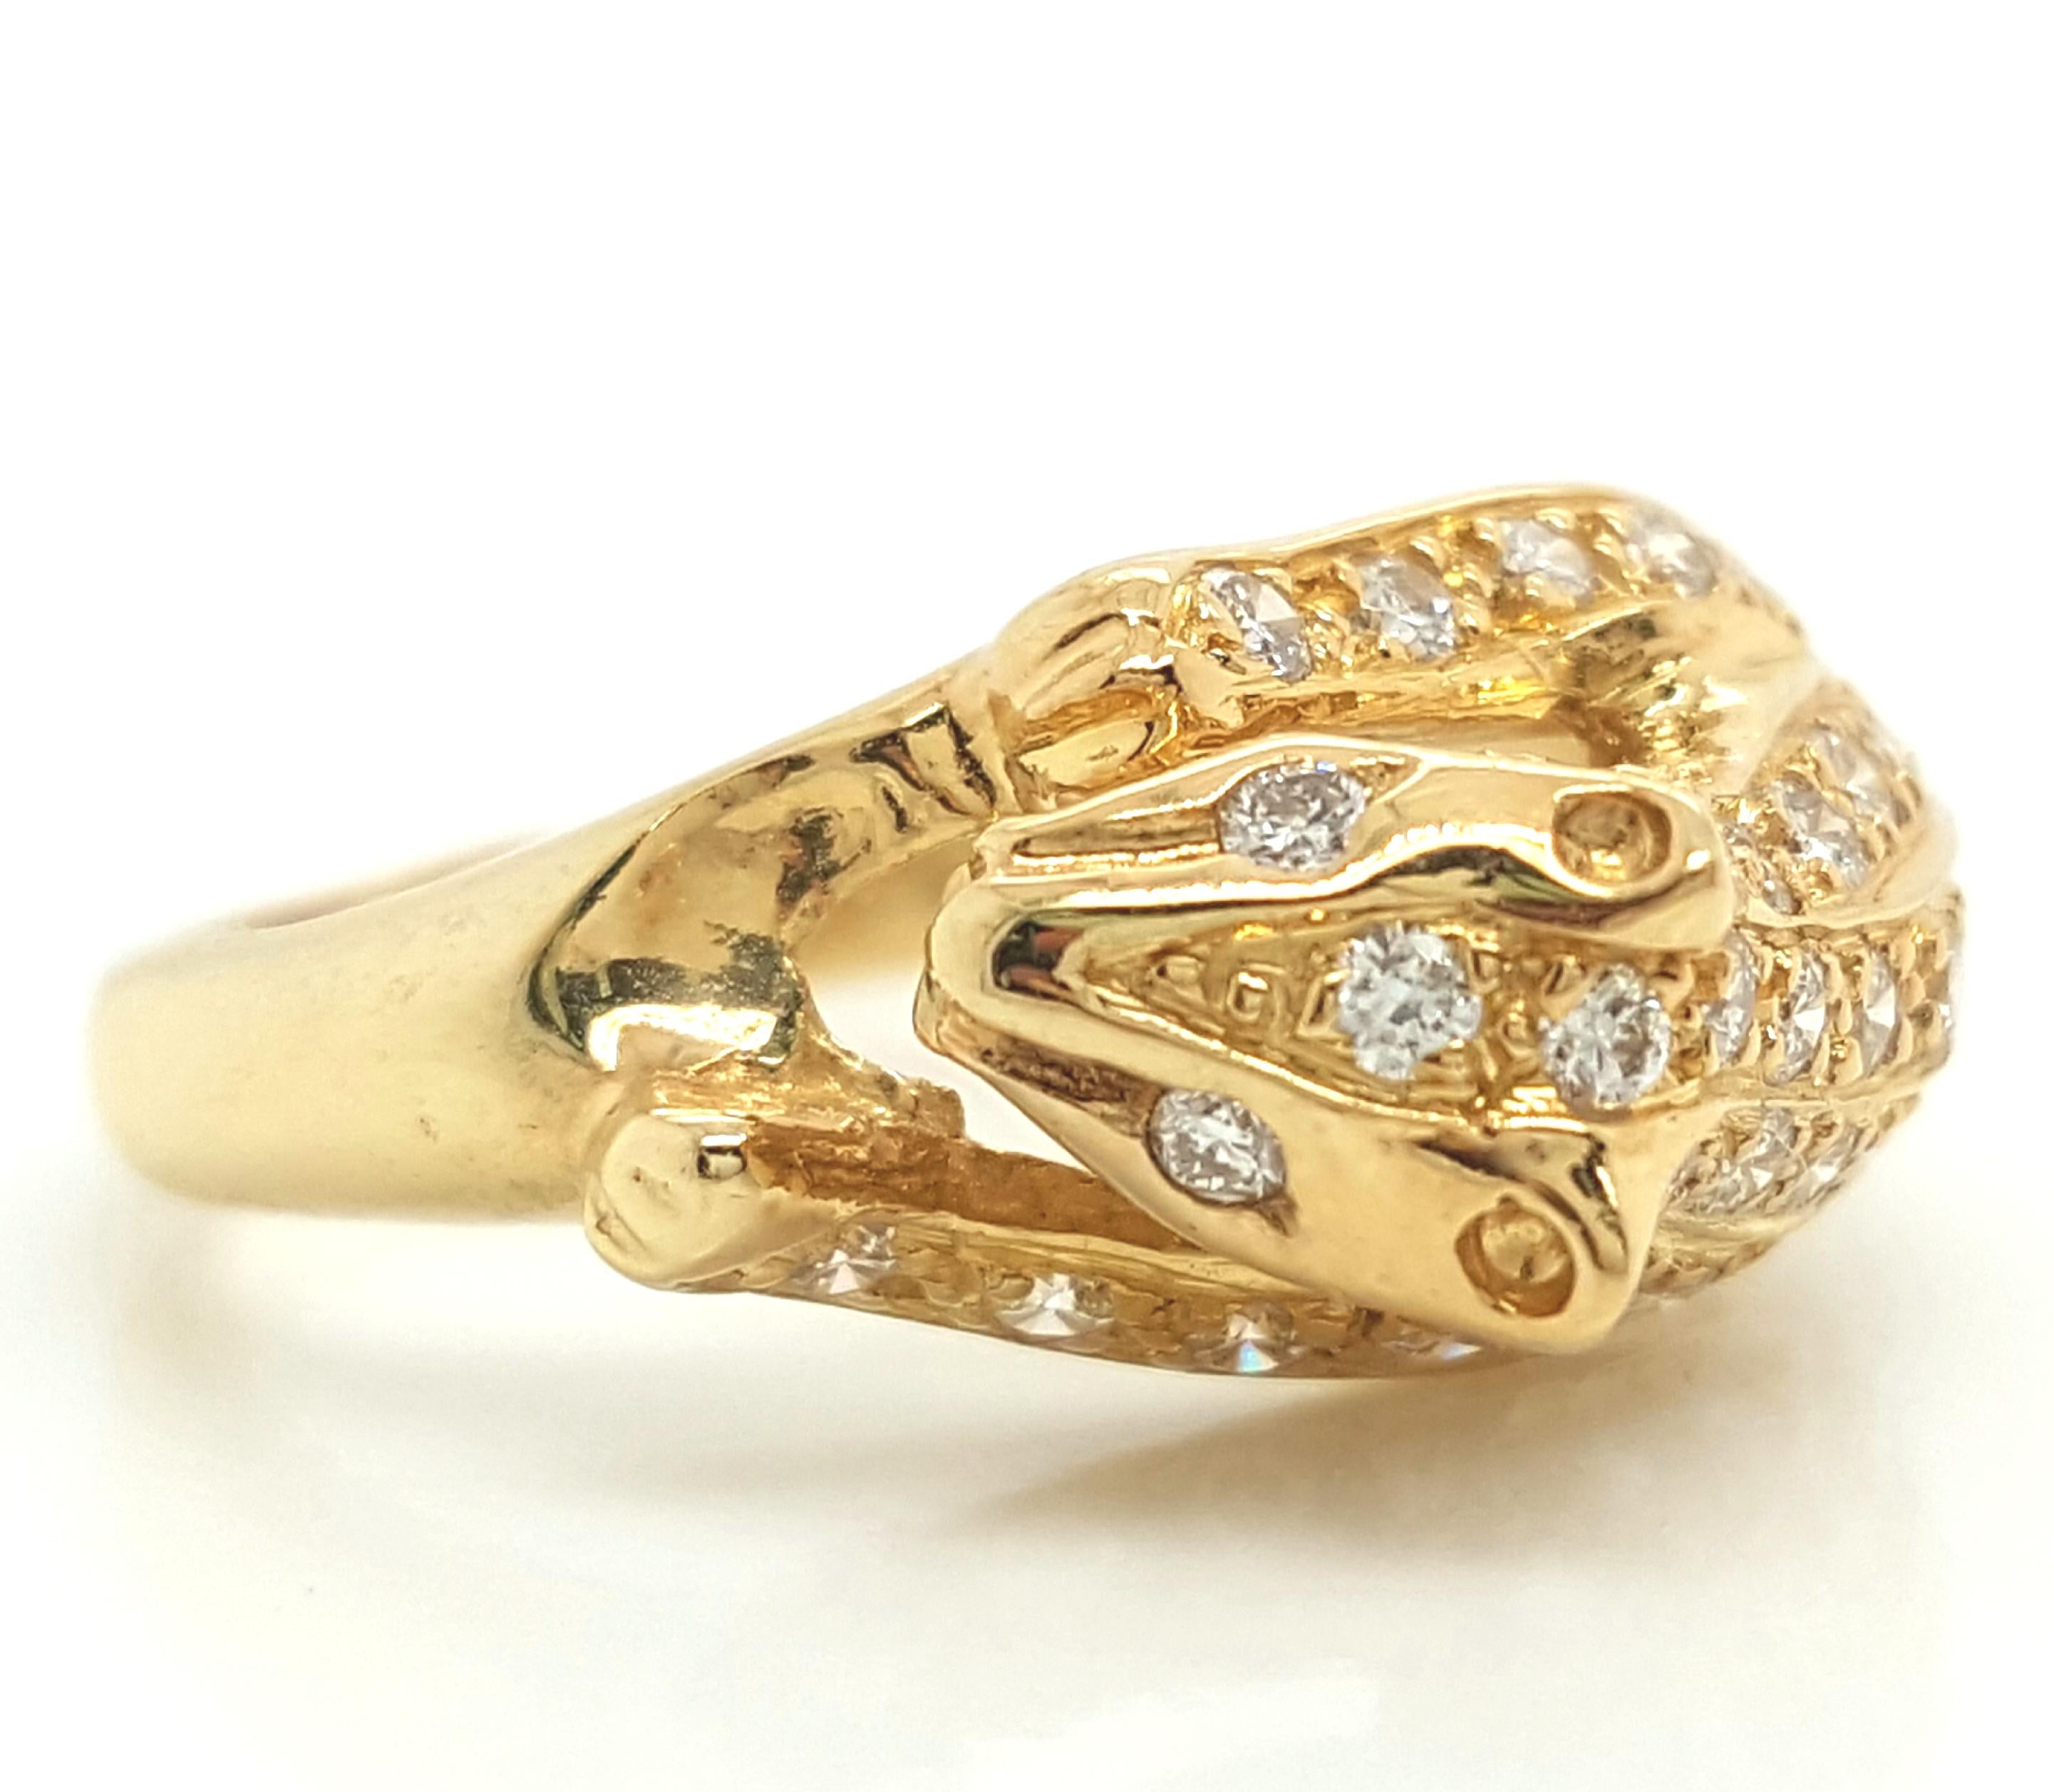 18K Yellow Gold and Diamond Panther Ring.   The ring, designed as a panther, is incredibly detailed and features pave set full-cut diamonds weighing a total of approximately 0.39 carats VS clarity and G - H in color.  The ring weighs 4.49 grams. 